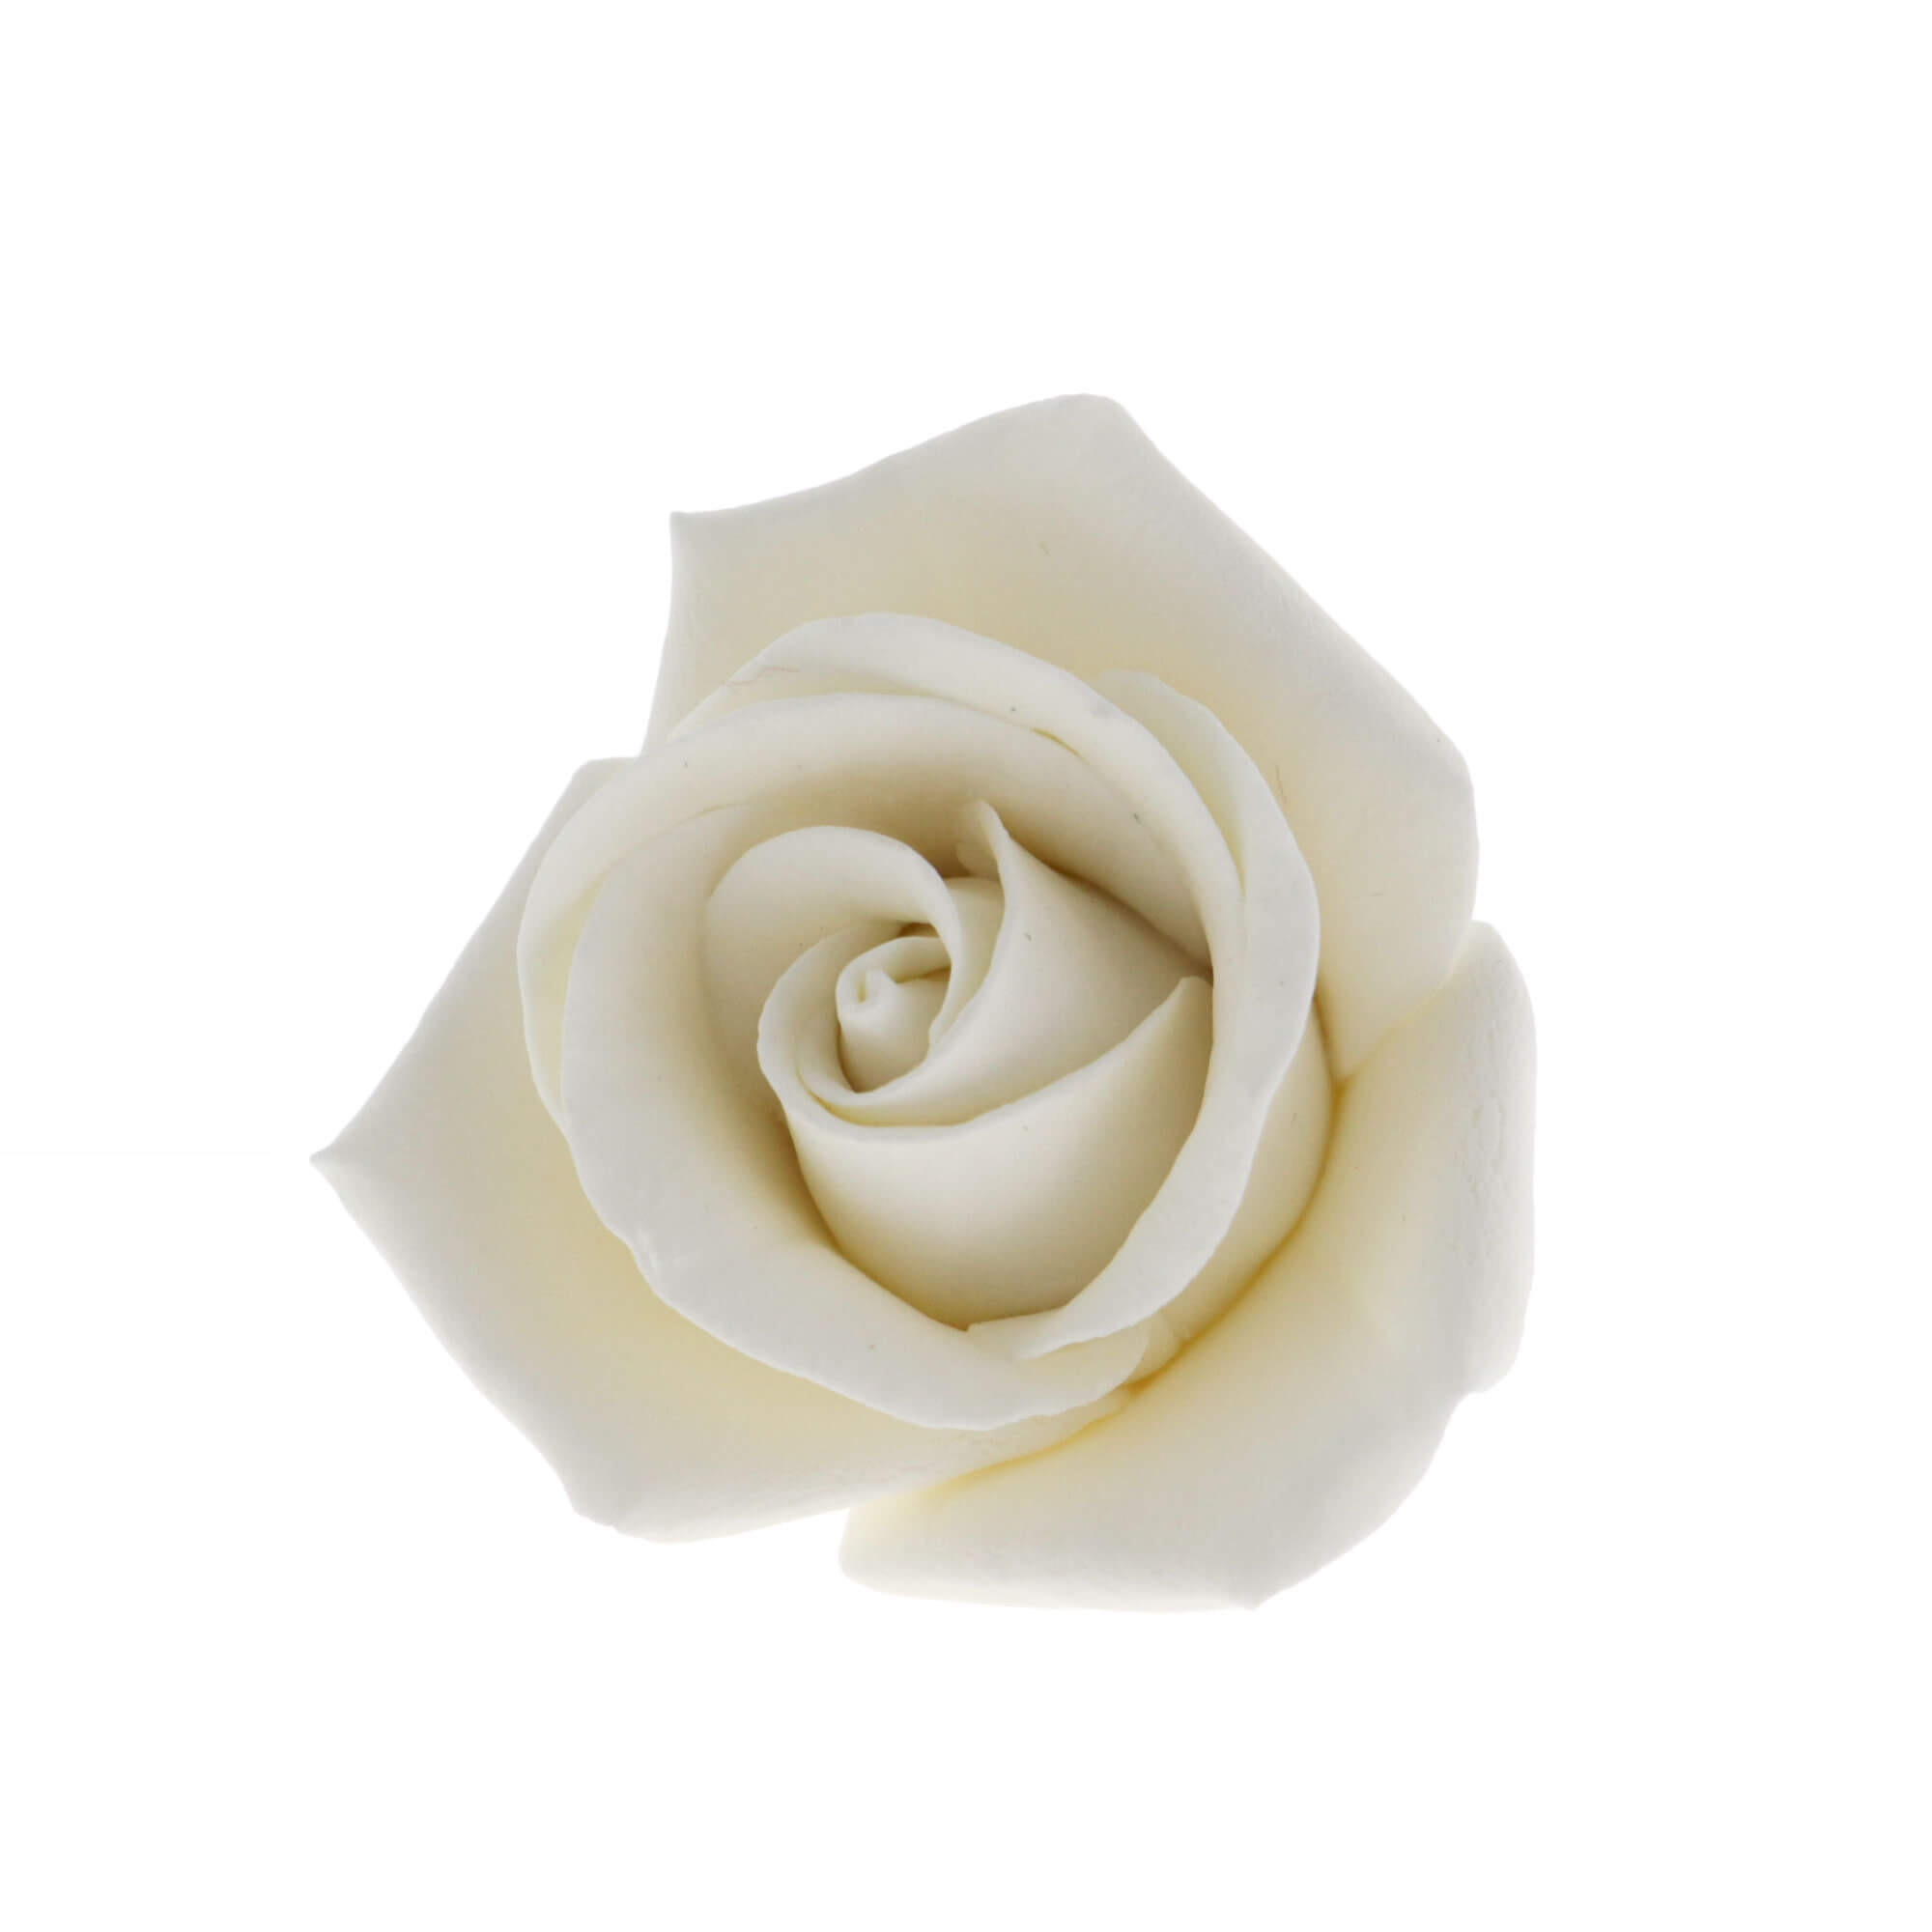 comunidad Alergia Abastecer Global Sugar Art Peace Rose Sugar Cake Flowers White 2 Inch, 25 Count by  Chef Alan Tetreault Roses